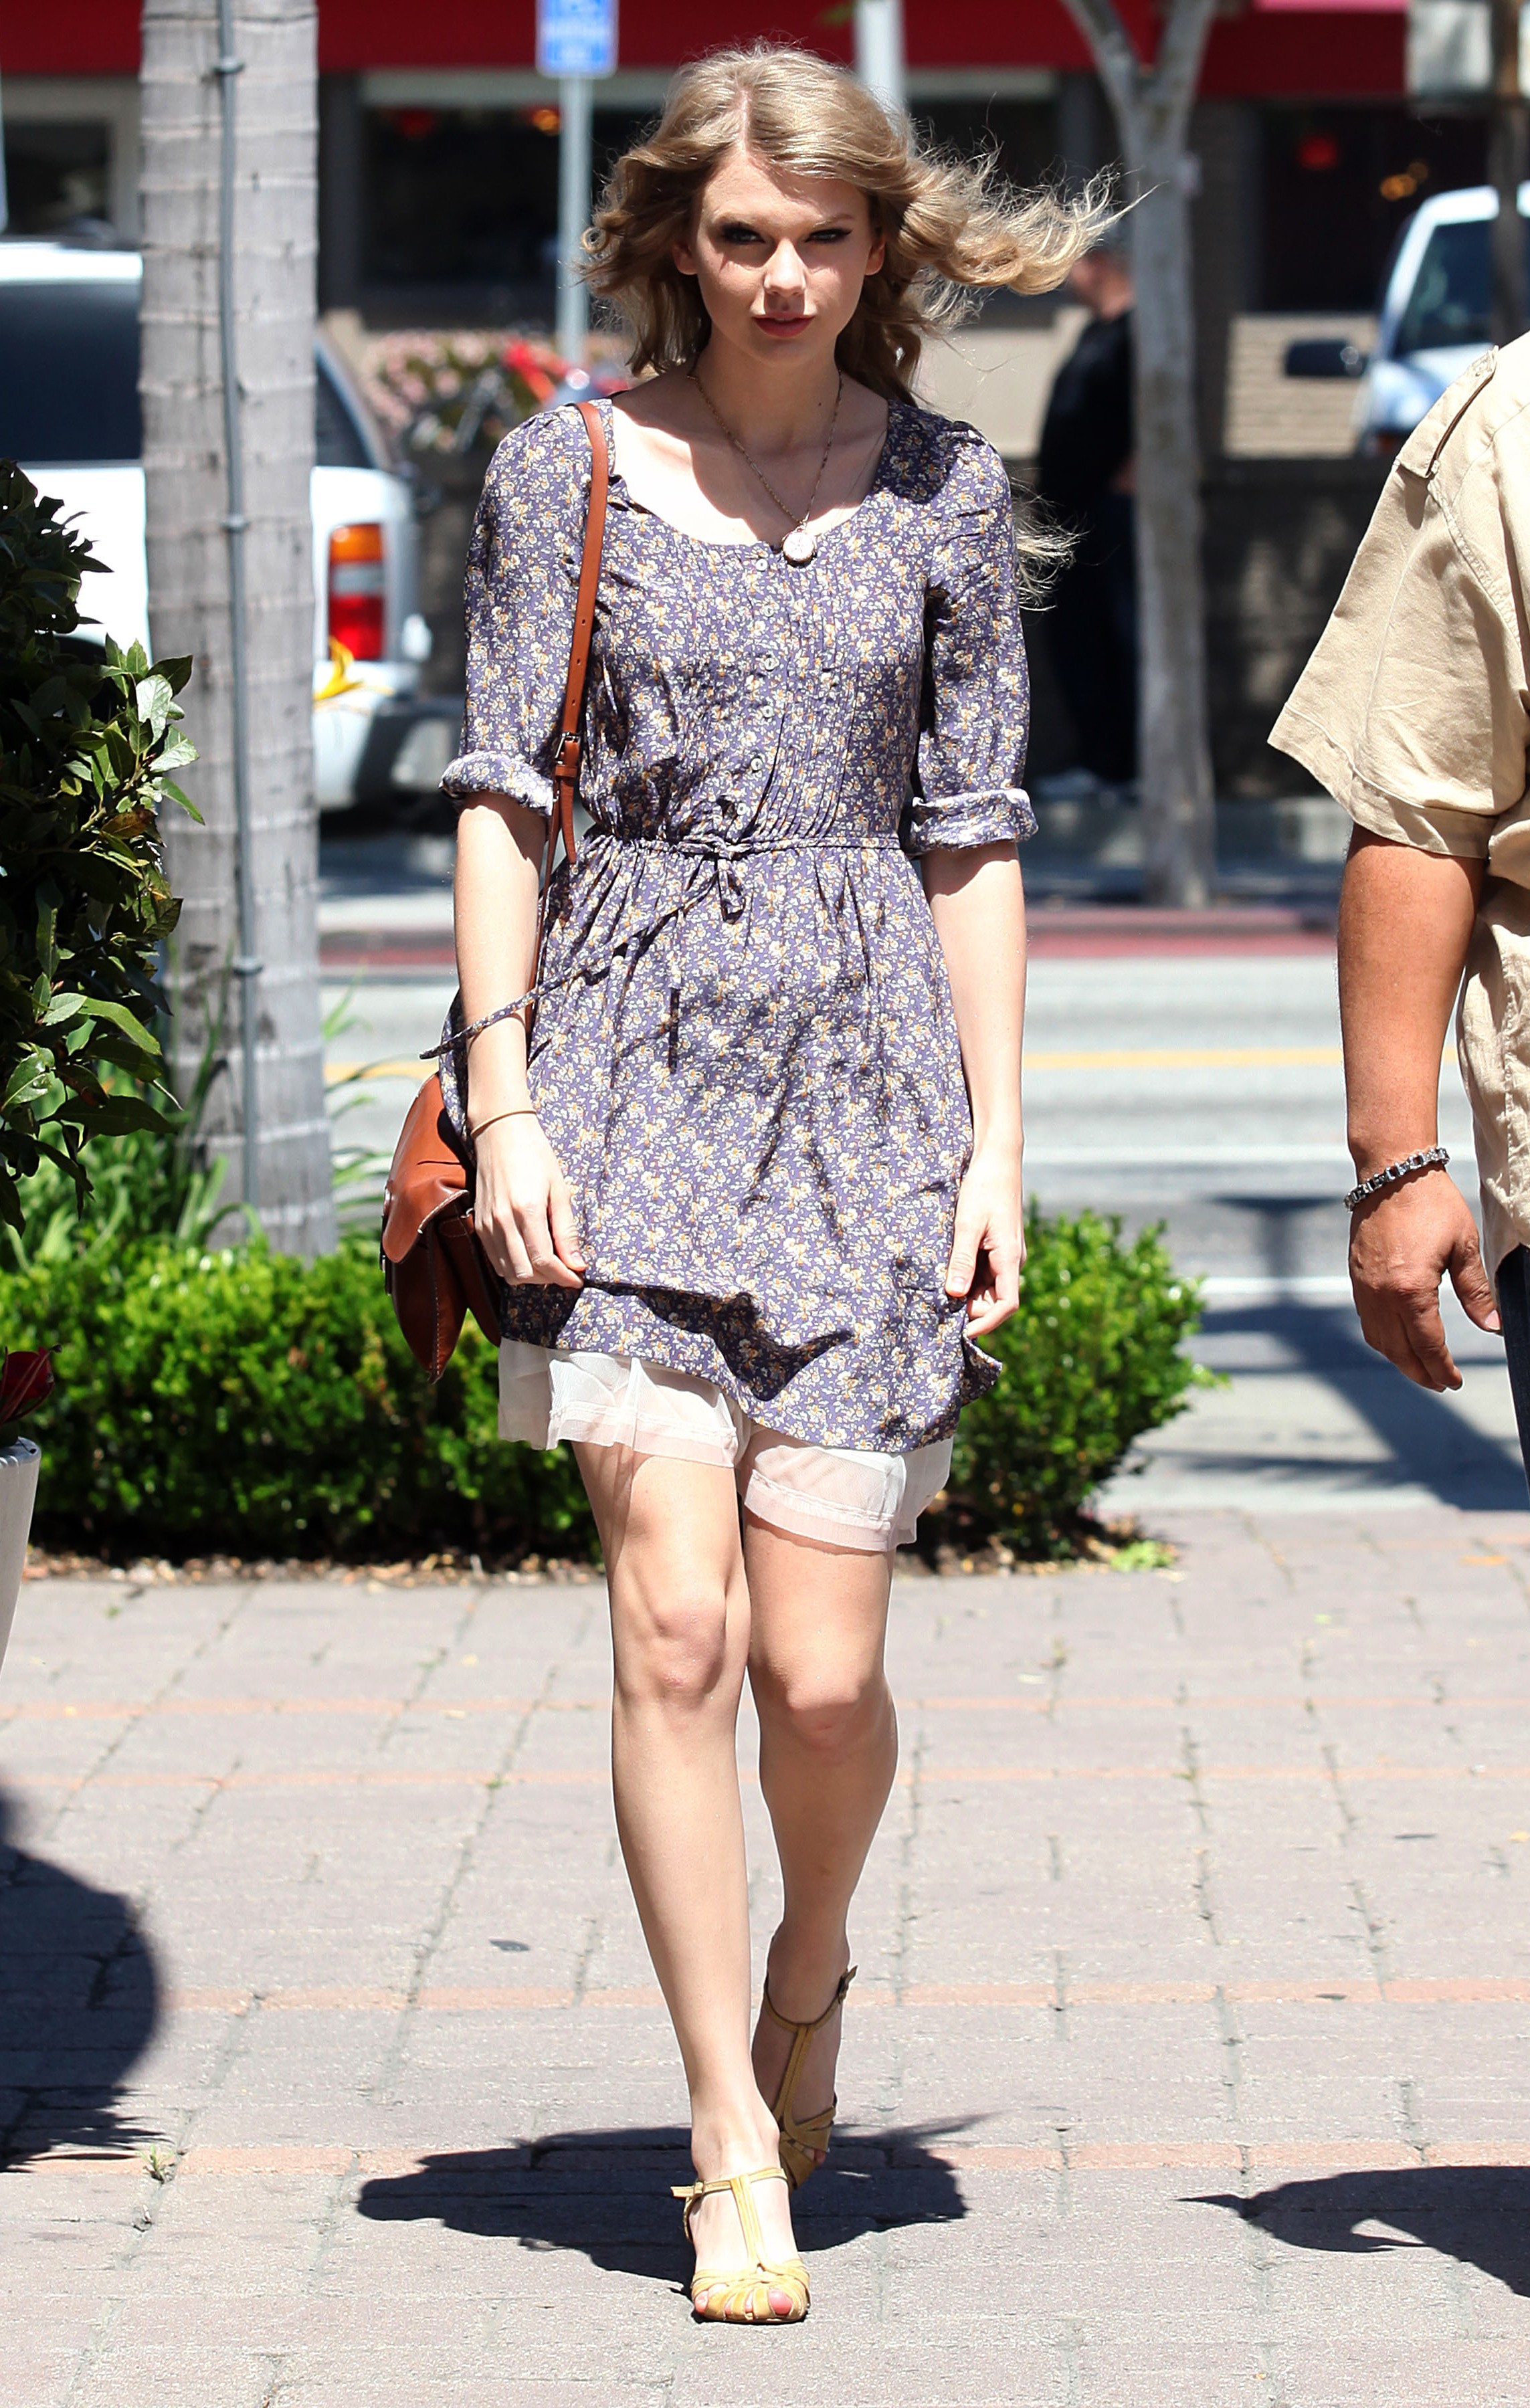 Taylor Swift Shopping At Target, California April 4, 2011 | TAYLOR SWIFT INDONESIA2287 x 3600